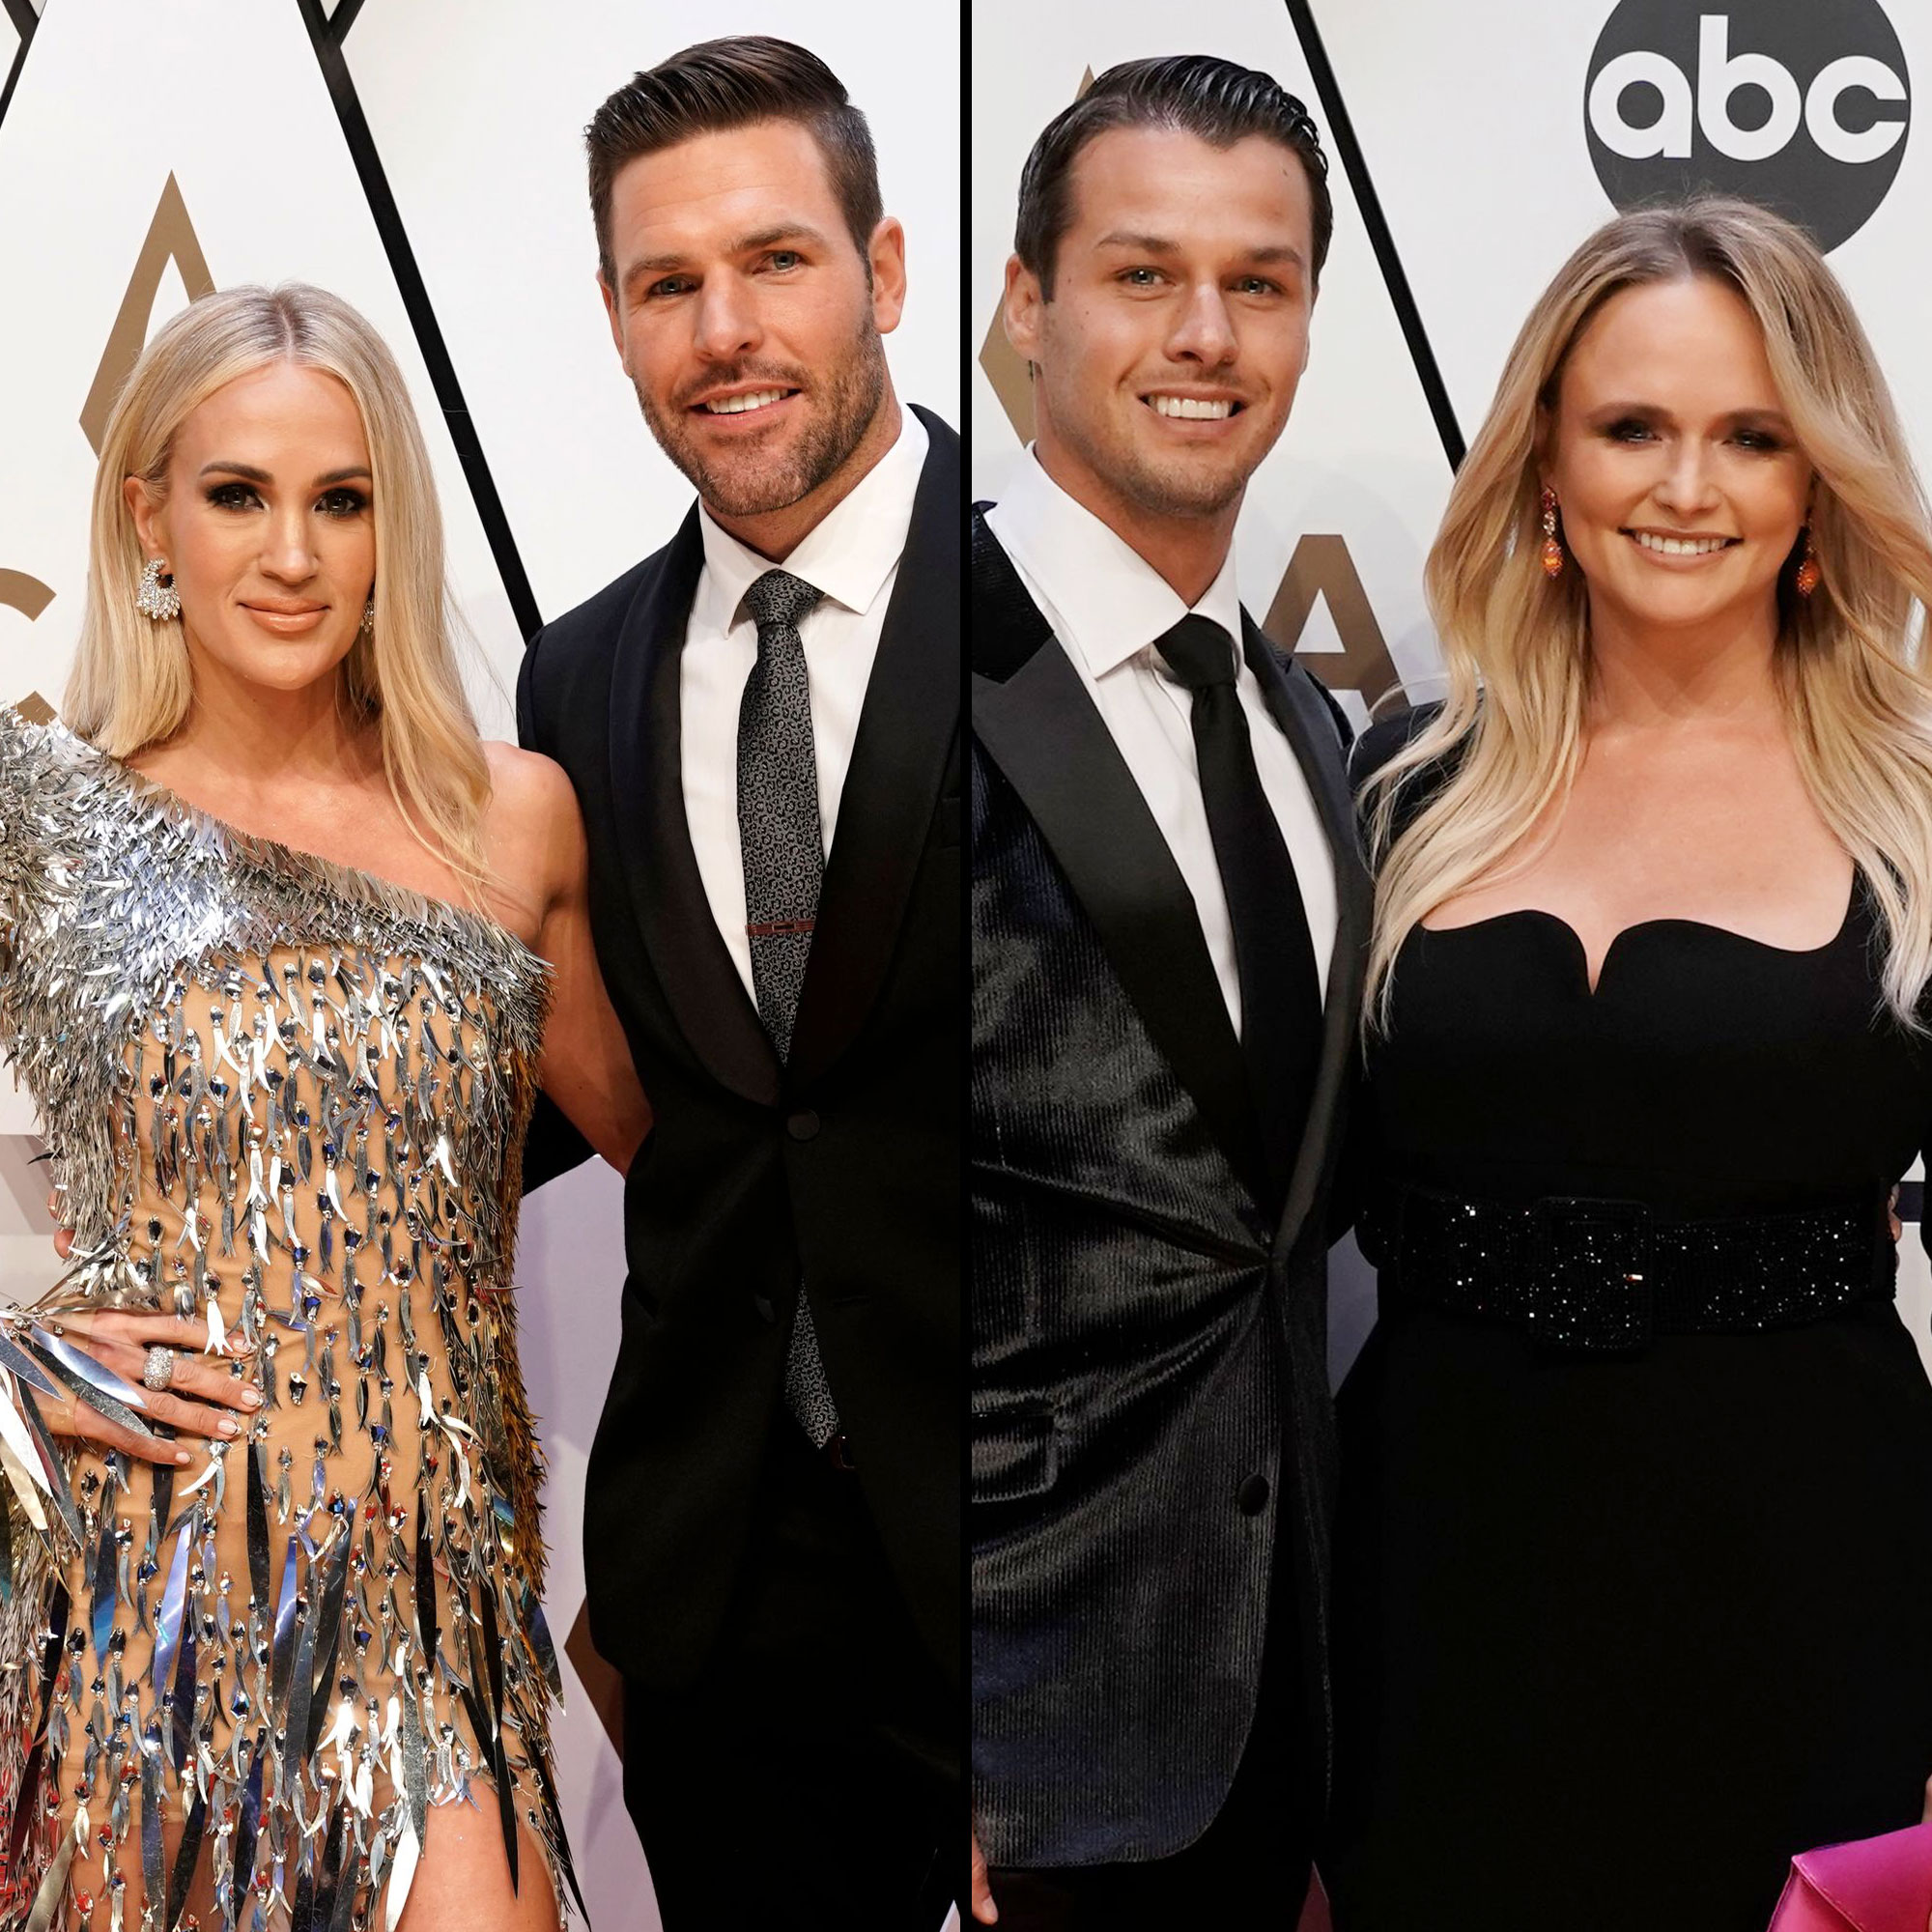 Carrie Underwood Brings Husband Mike Fisher To CMA Awards 2021 After His  Comments About Aaron Rodgers, 2021 CMA Awards, Carrie Underwood, CMA Awards,  Mike Fisher